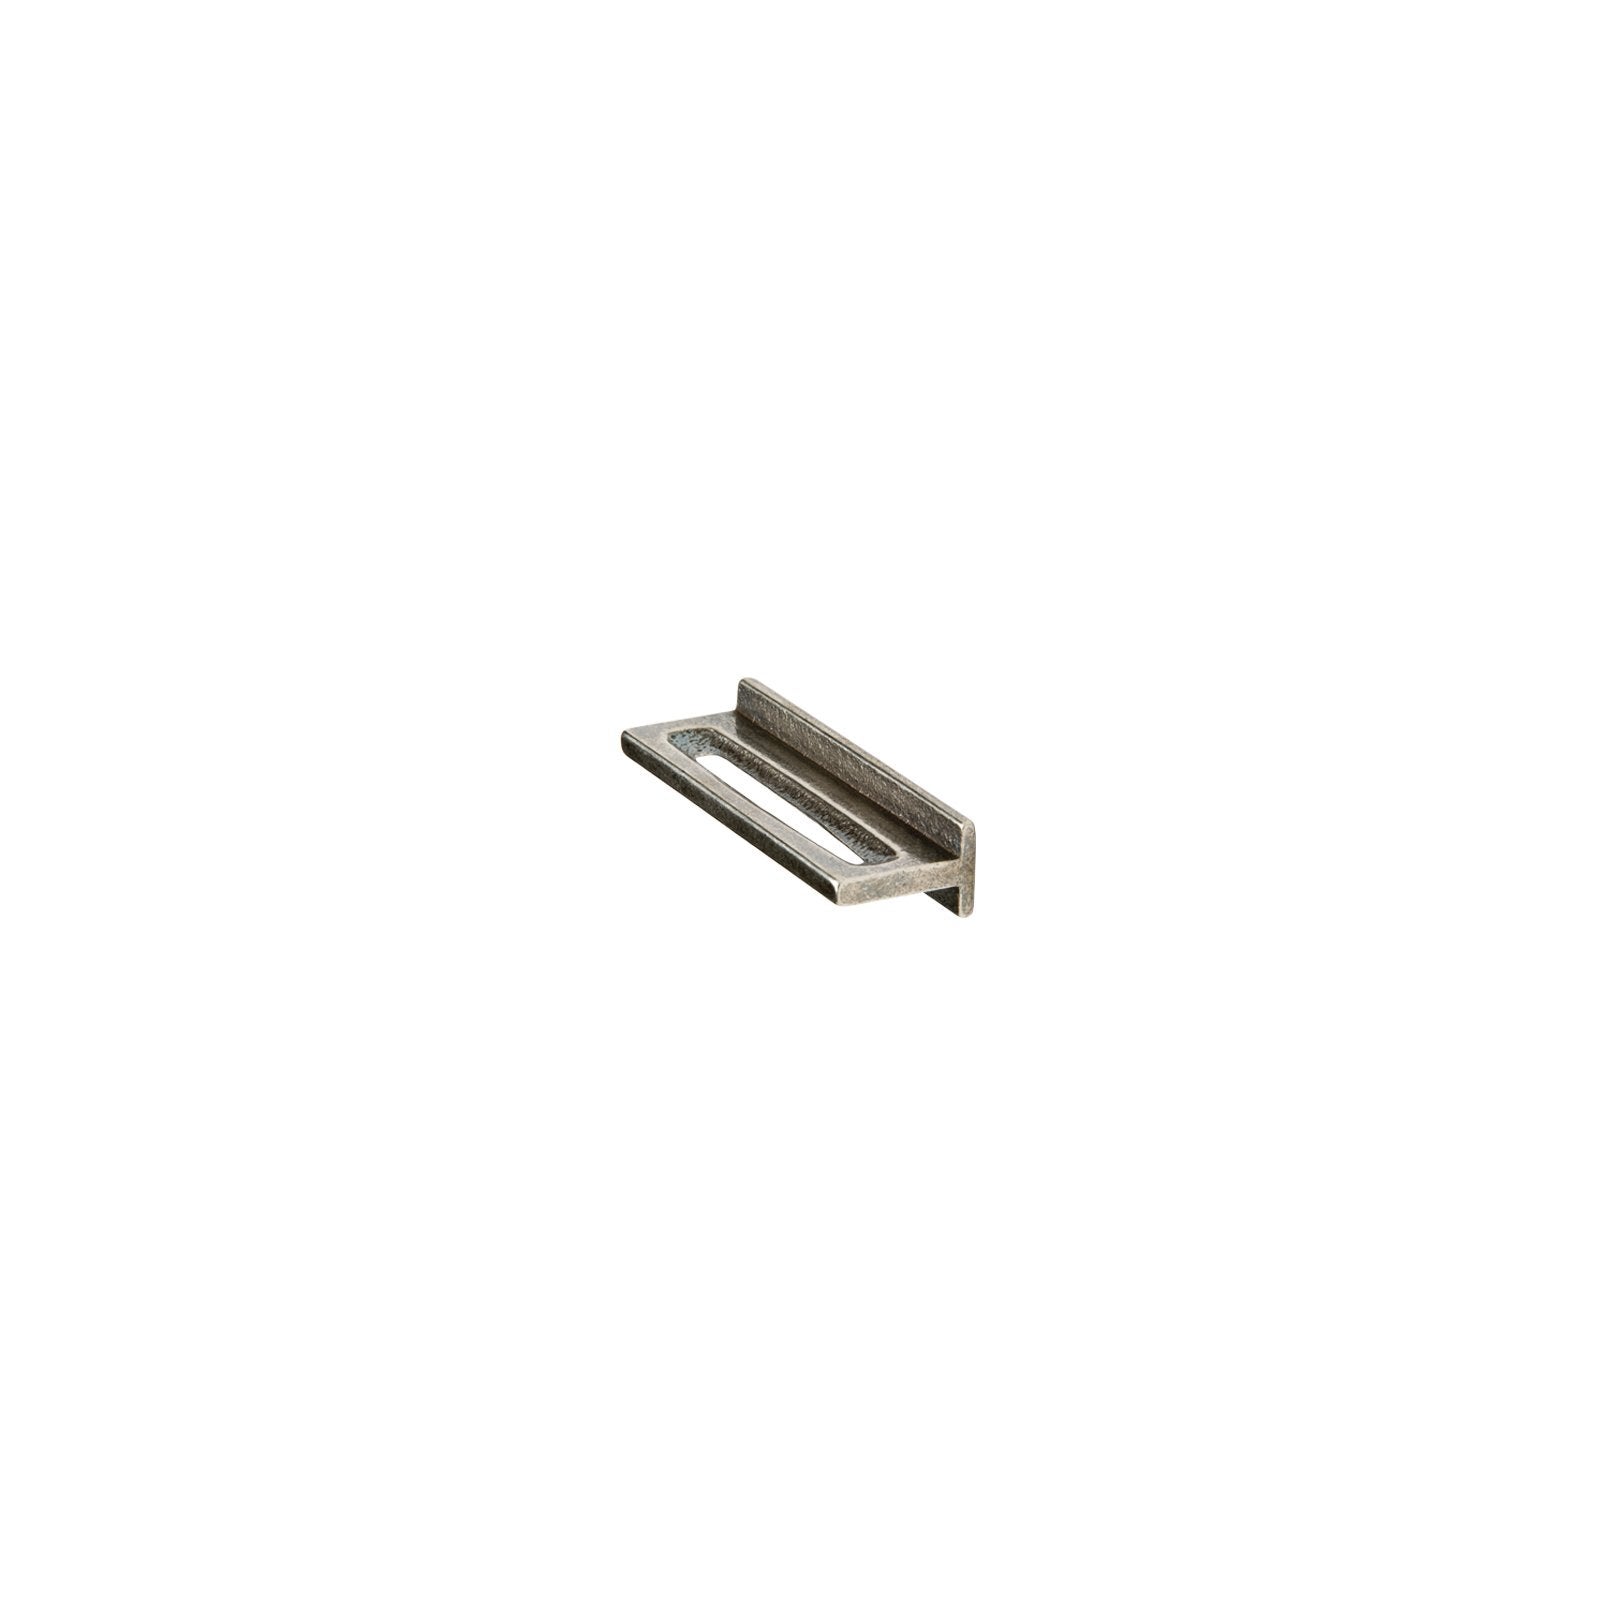 Rocky Mountain Hardware CK20125 - 7/8" x 4" Tab Cabinet Pull